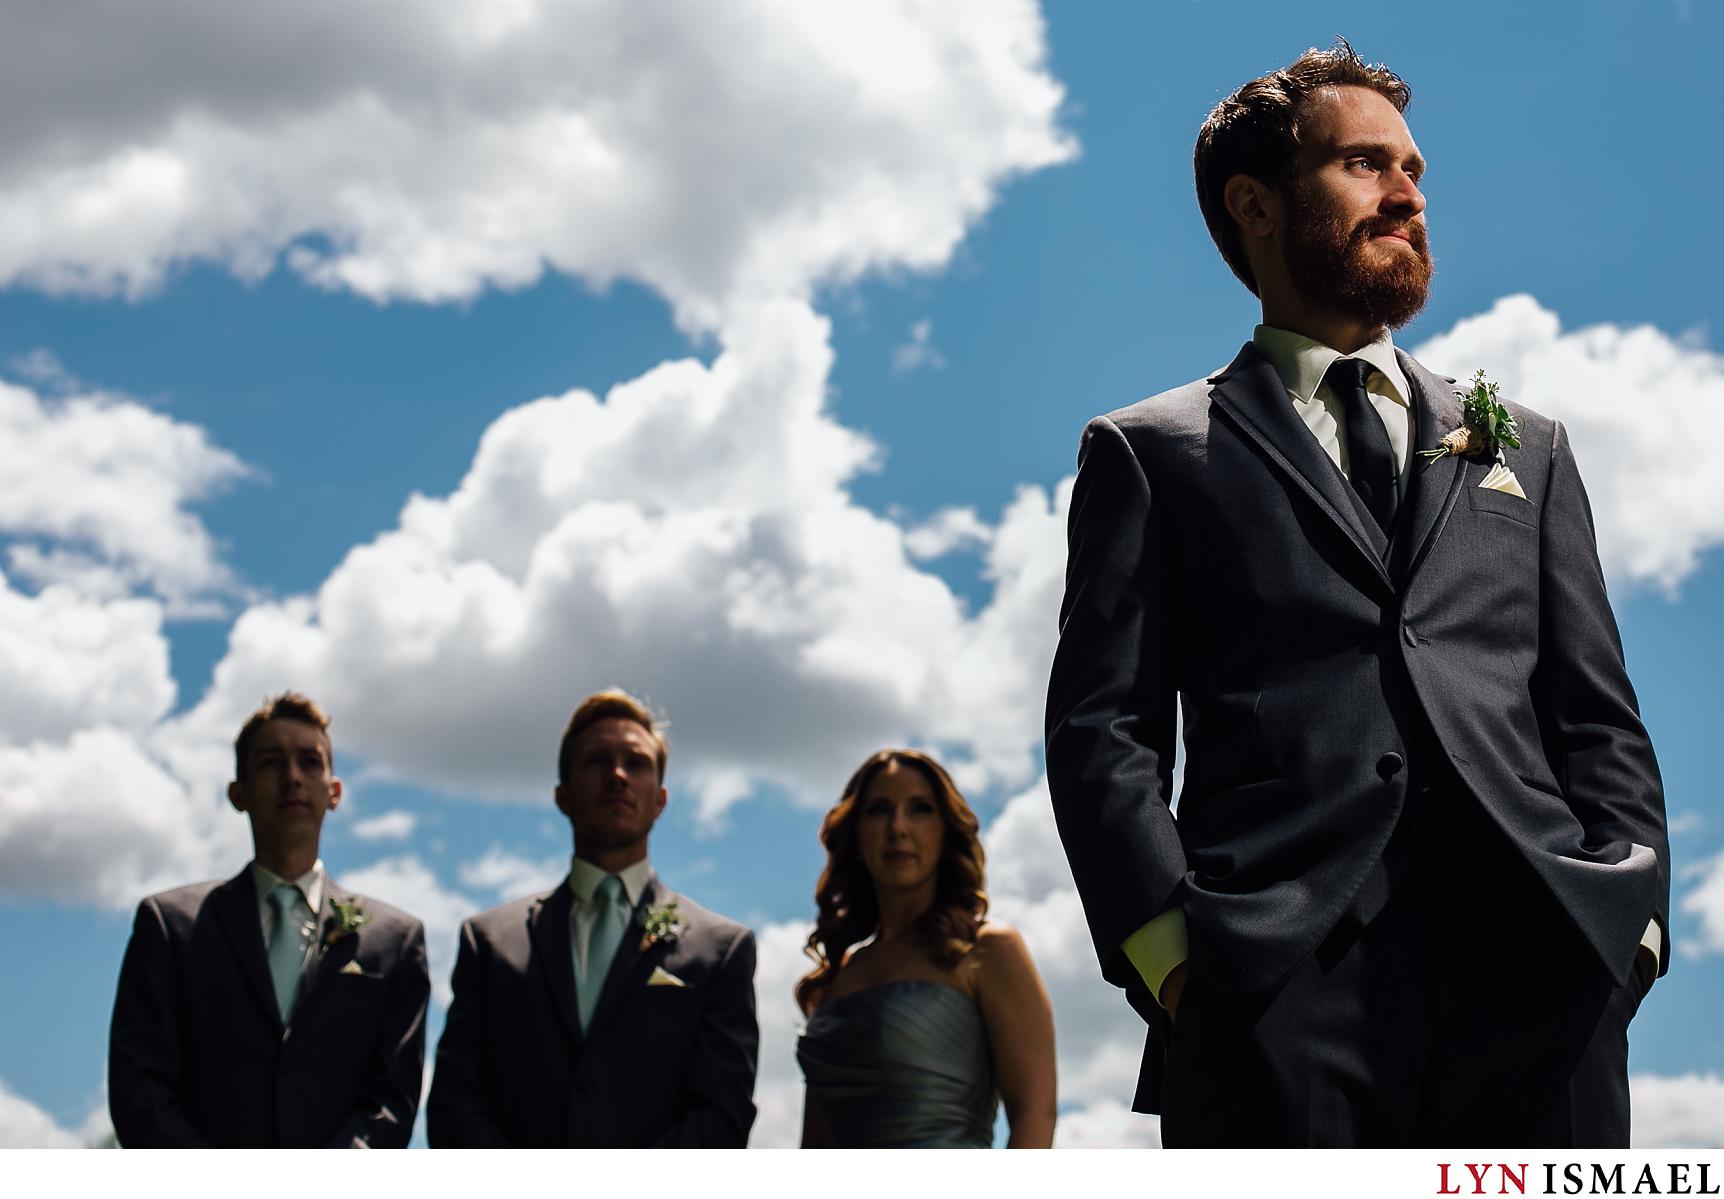 A dramatic portrait of the groom with his groomsmen and groom's woman photographed by a Waterloo Region wedding photographer.